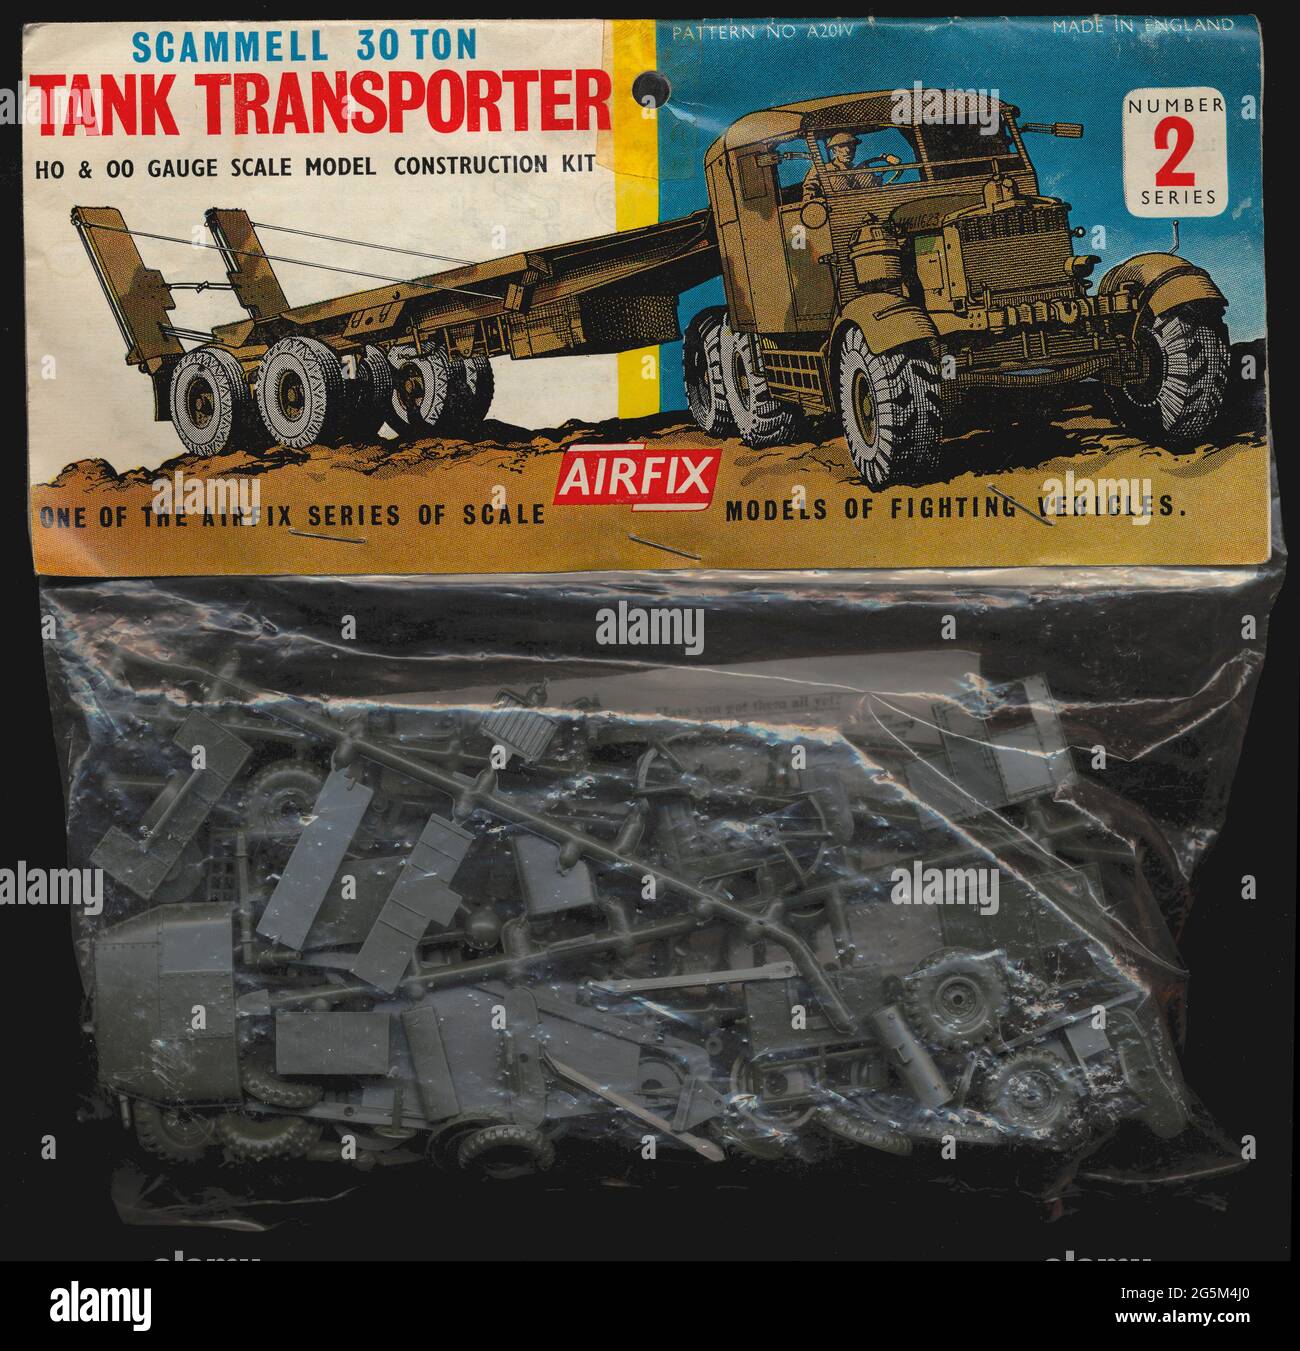 A new Airfix model for 1962, part of a series of military vehicles in their ho/oo scale range.  This is the rare first packaging art, which was modernised the following year.  The model has been on sale ever since. It was released in a different box in America.  Plastic model kits were a huge hobby during the 1950s to 1970s with children and more serious older modellers and while the interest has lessened since there is still a core market out there. Airfix are now part of the Hornby group. Stock Photo